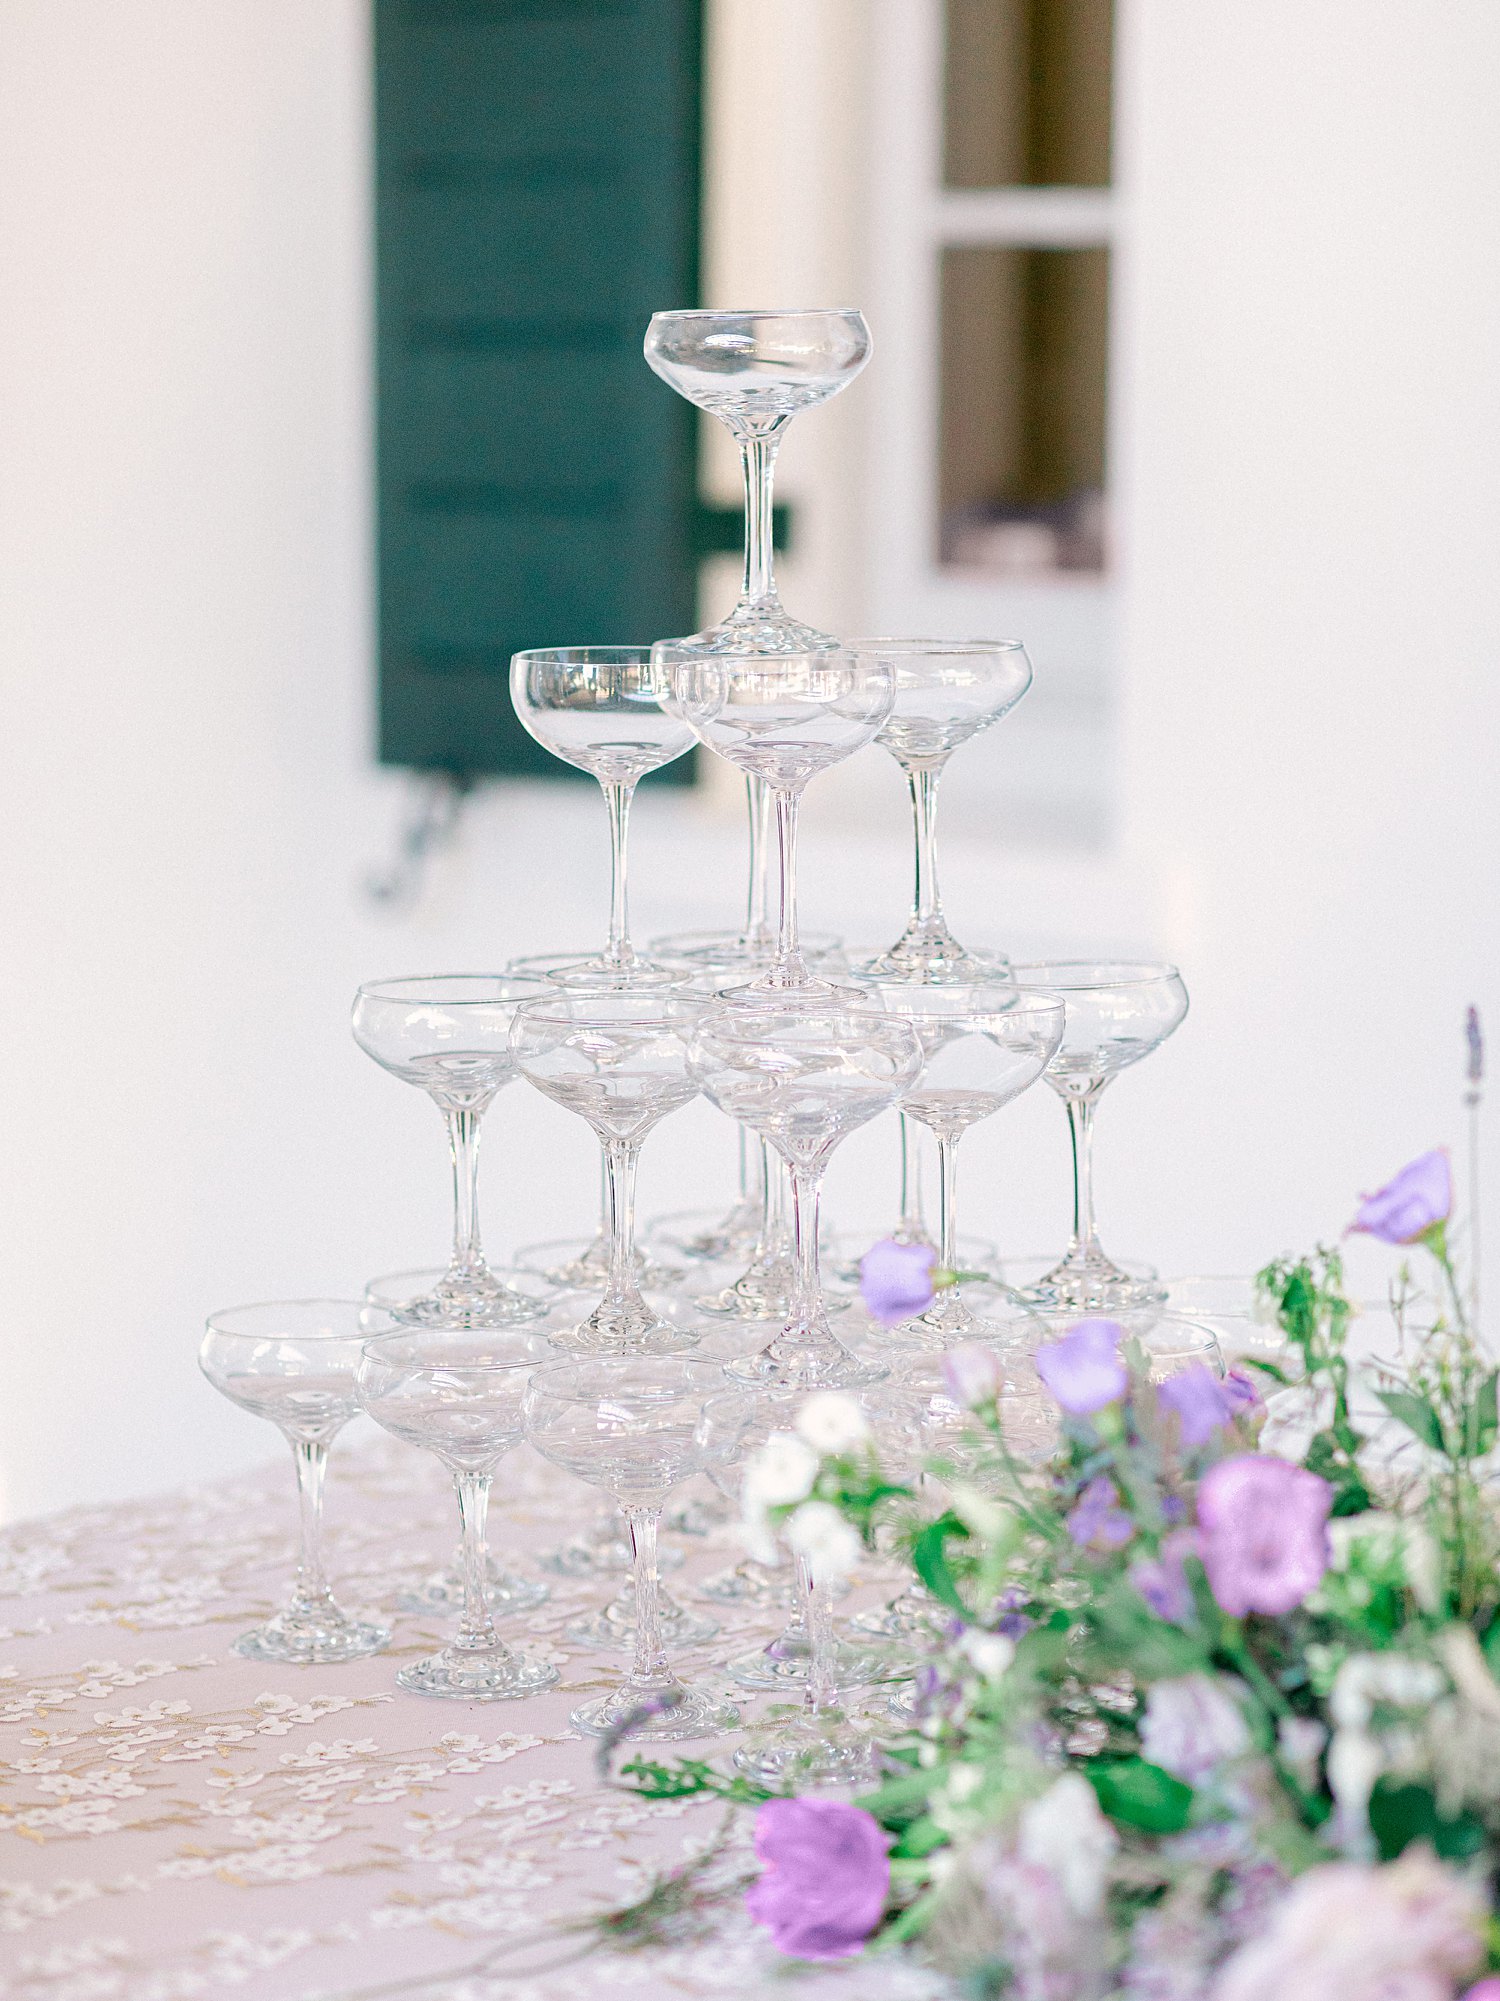 Champaign tower on table with purple linen and florals at wedding reception